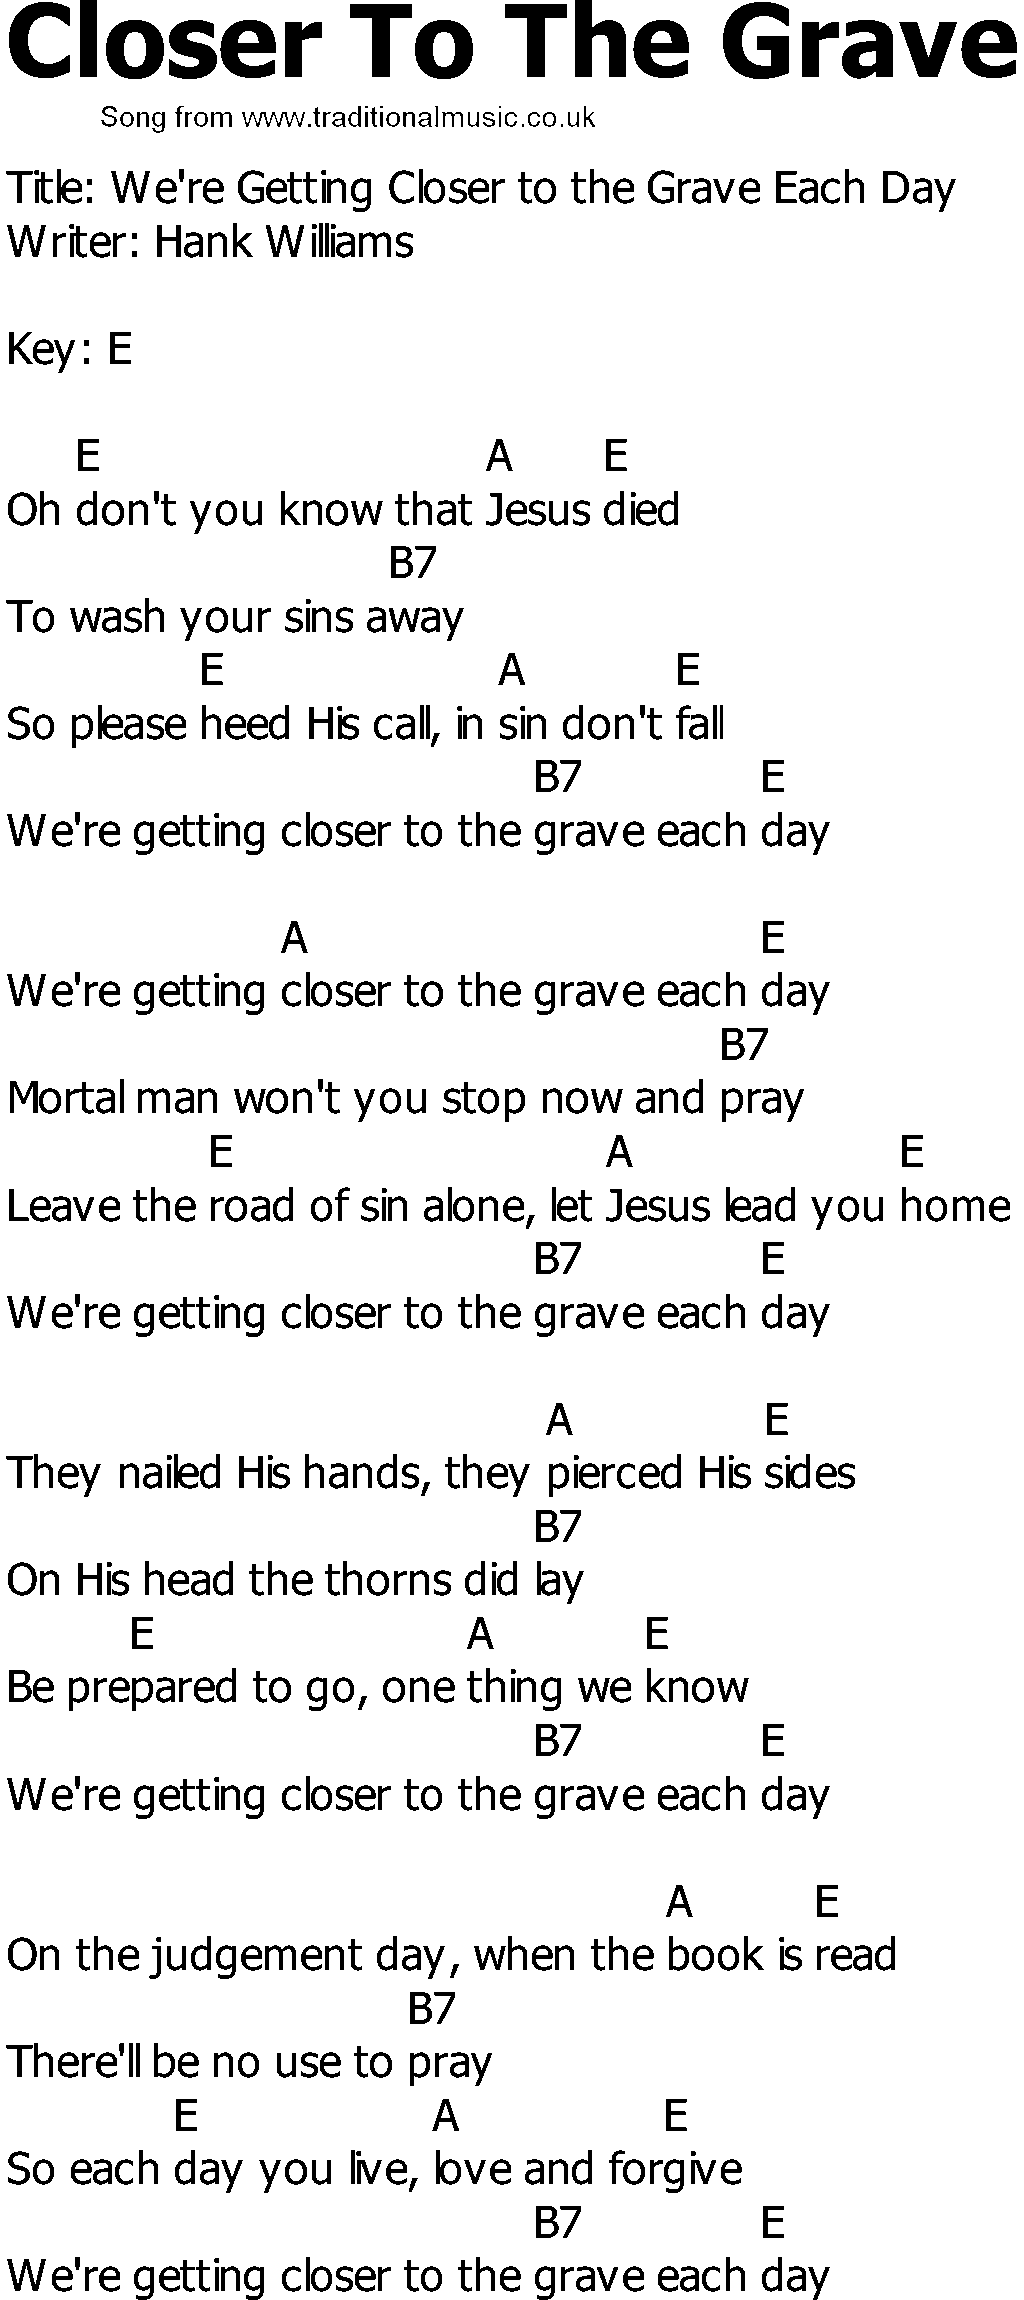 Old Country song lyrics with chords - Closer To The Grave